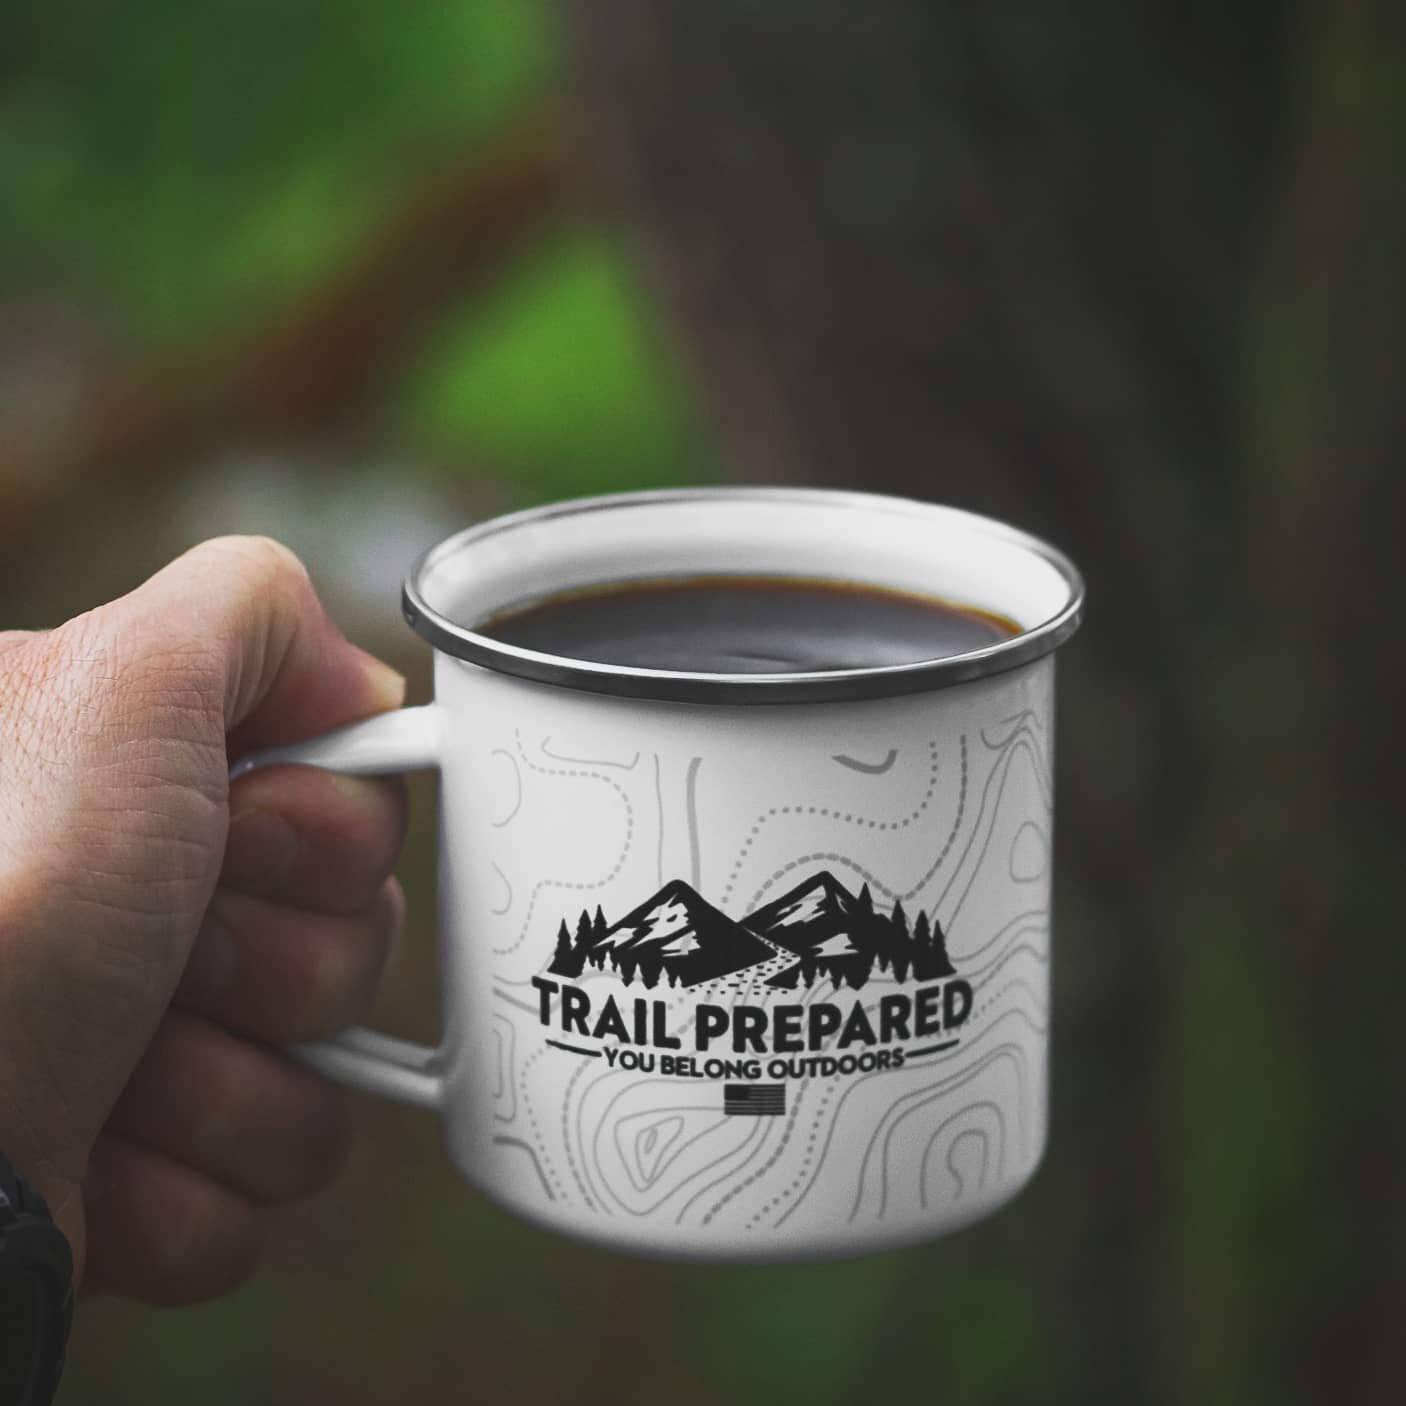 Start the new year off right! Go outside &amp; enjoy a hot cup of great coffee! ☕
-
-
-
-
-
#TrailPrepared #YouBelongOutdoors #EnamelMug #Coffee #Campsite  #CampsiteCoffee #Outdoors #MotherNature #GreatOutdoors #CampHammock #Camping #Hiking #Backpack